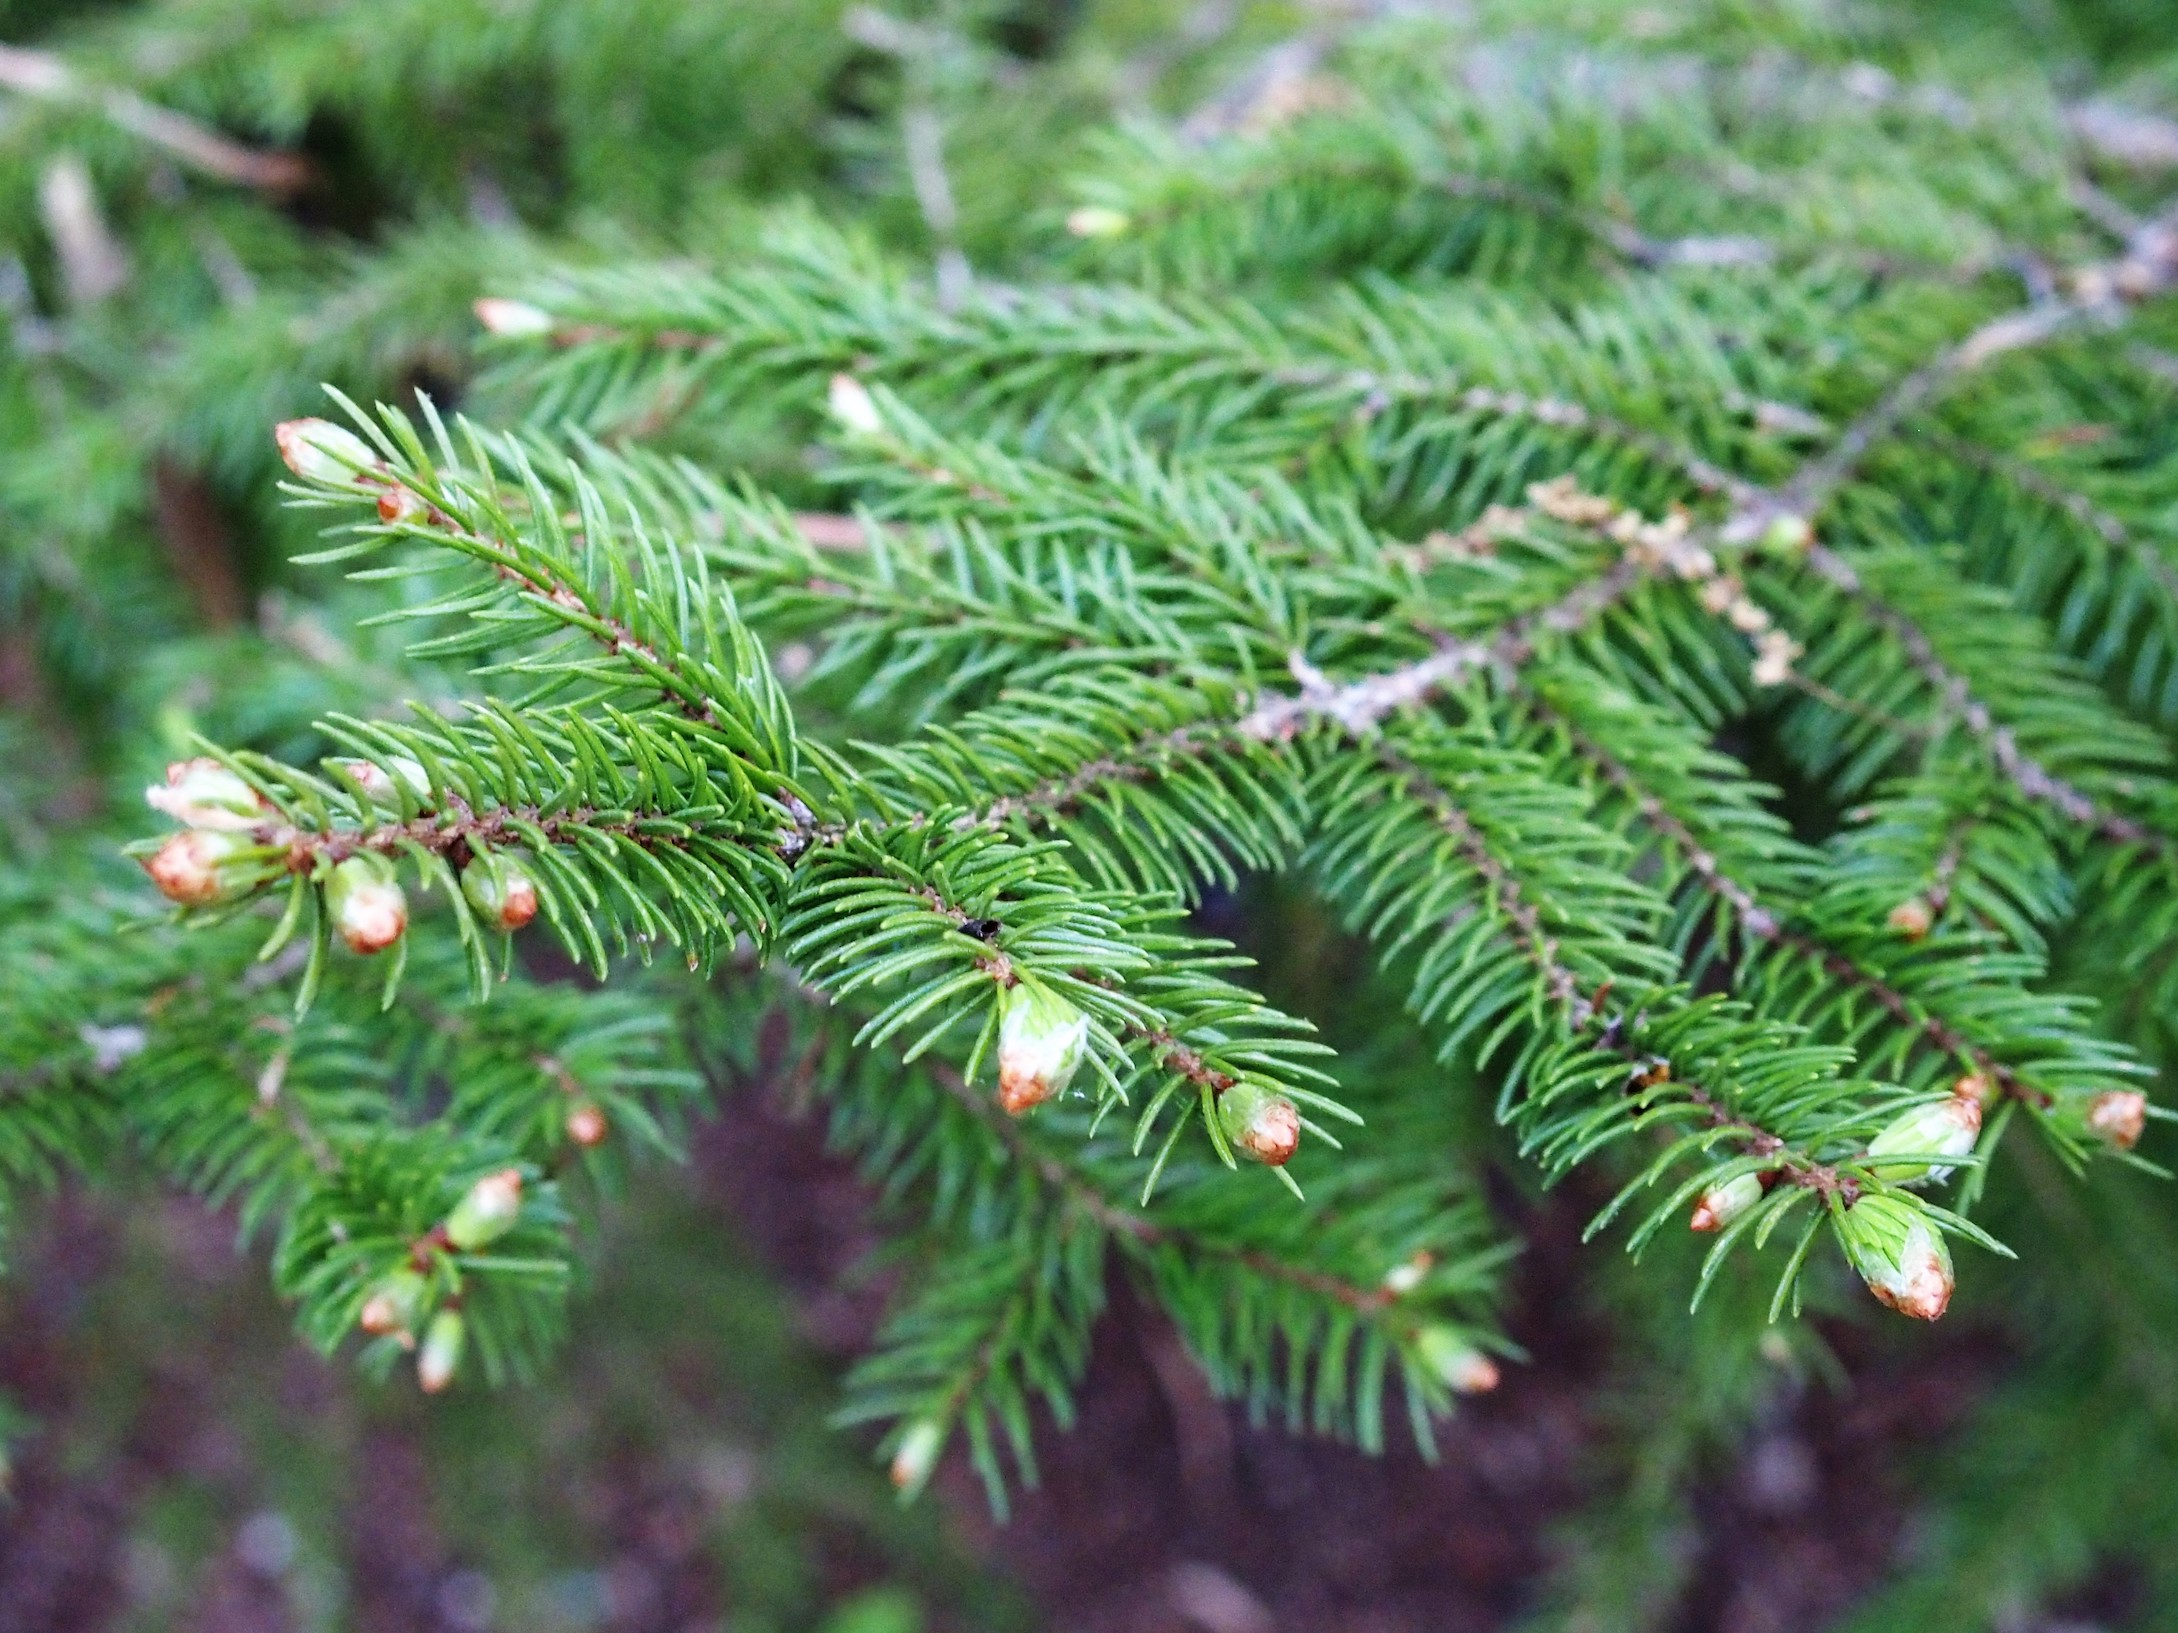 The Scientific Name is Picea rubens. You will likely hear them called Red Spruce, He Balsam. This picture shows the Note the sharp needles are square in cross section, while fir needles are blunt and flat of Picea rubens